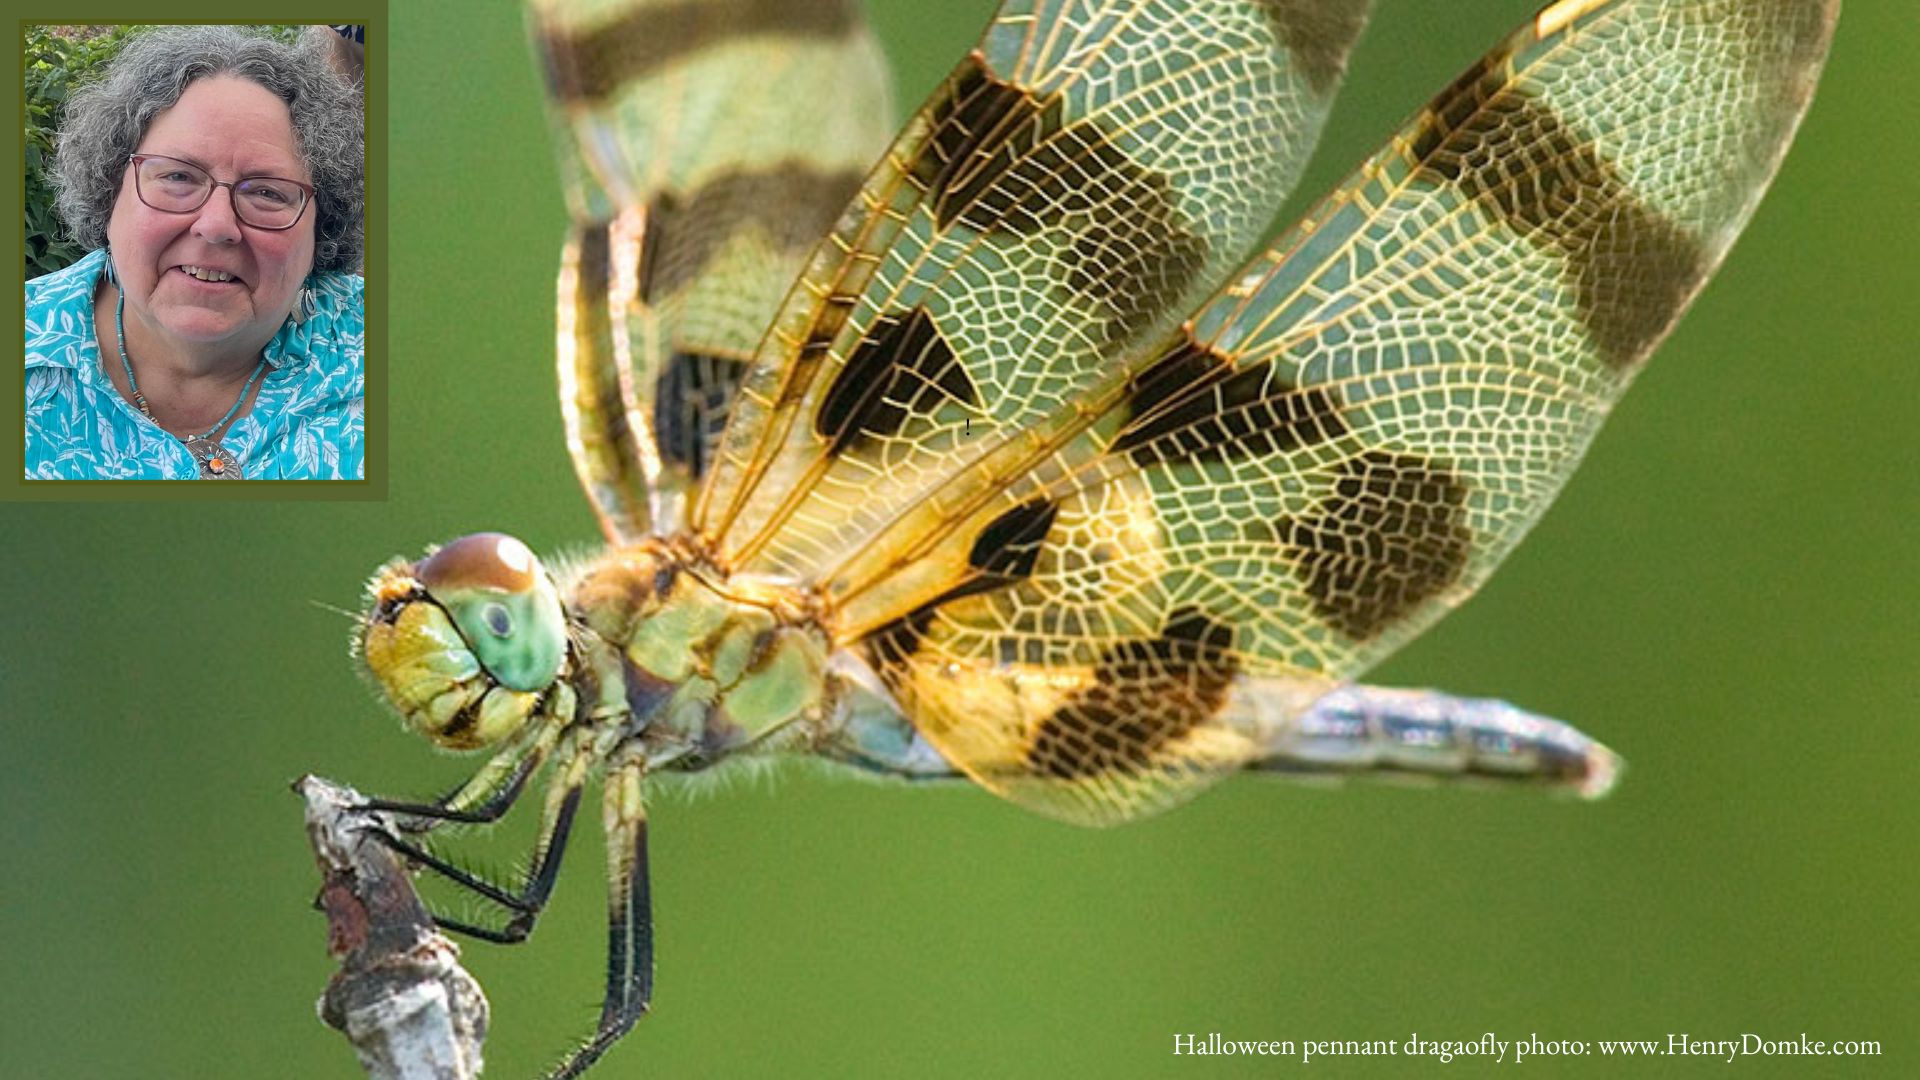 Dragonfly with inset headshot photo.